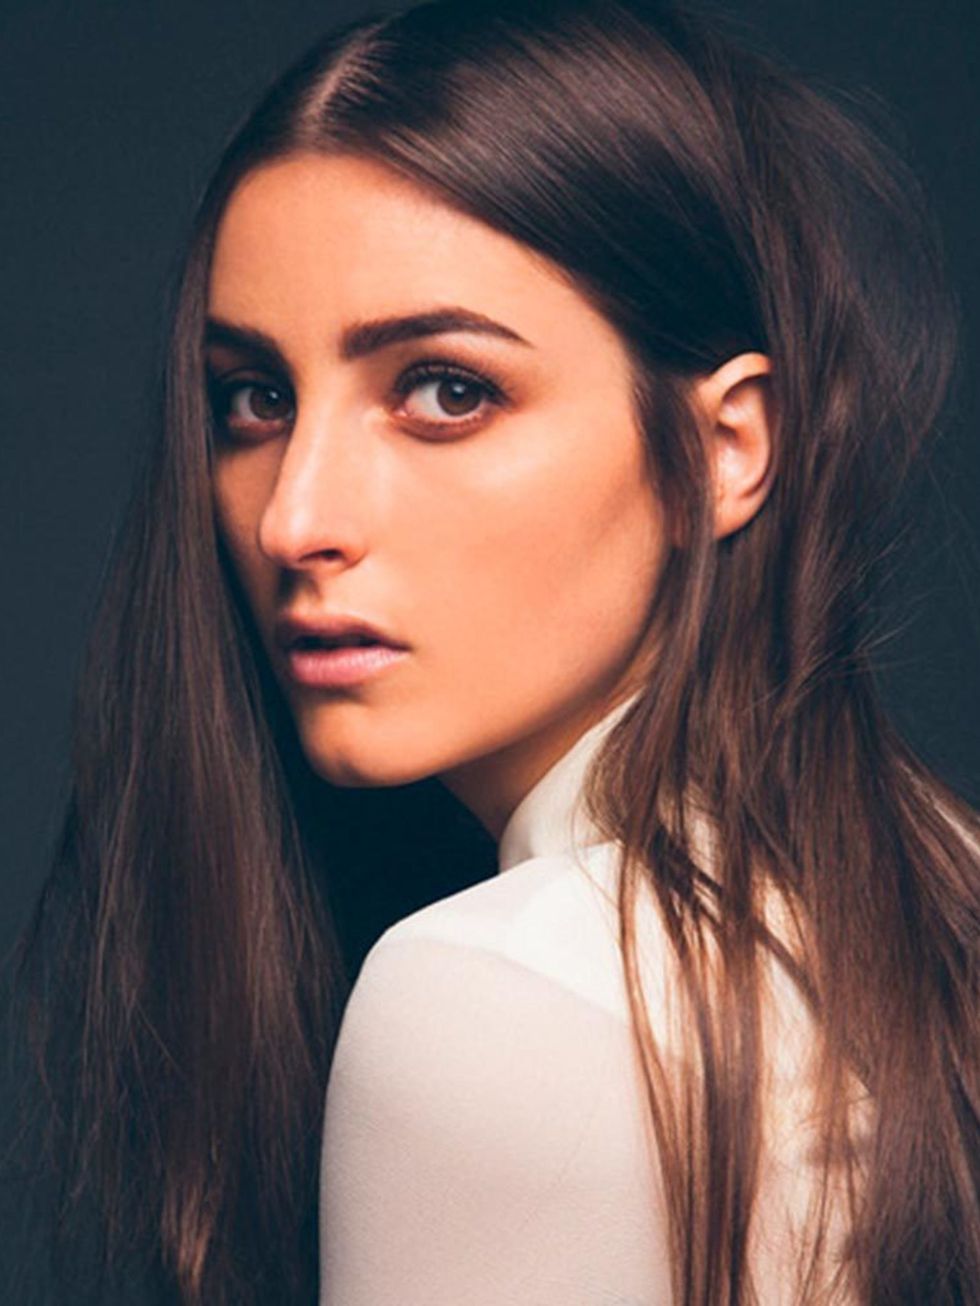 <p><strong>GIGS: Banks at 02 Academy Brixton</strong></p>

<p>Broodingly cool singer Jillian Banks arrives at Brixton 02 Academy this weekend, appearing as her better-known stage outfit Banks.</p>

<p>Fall in love all over again with Banks saccharine, gl